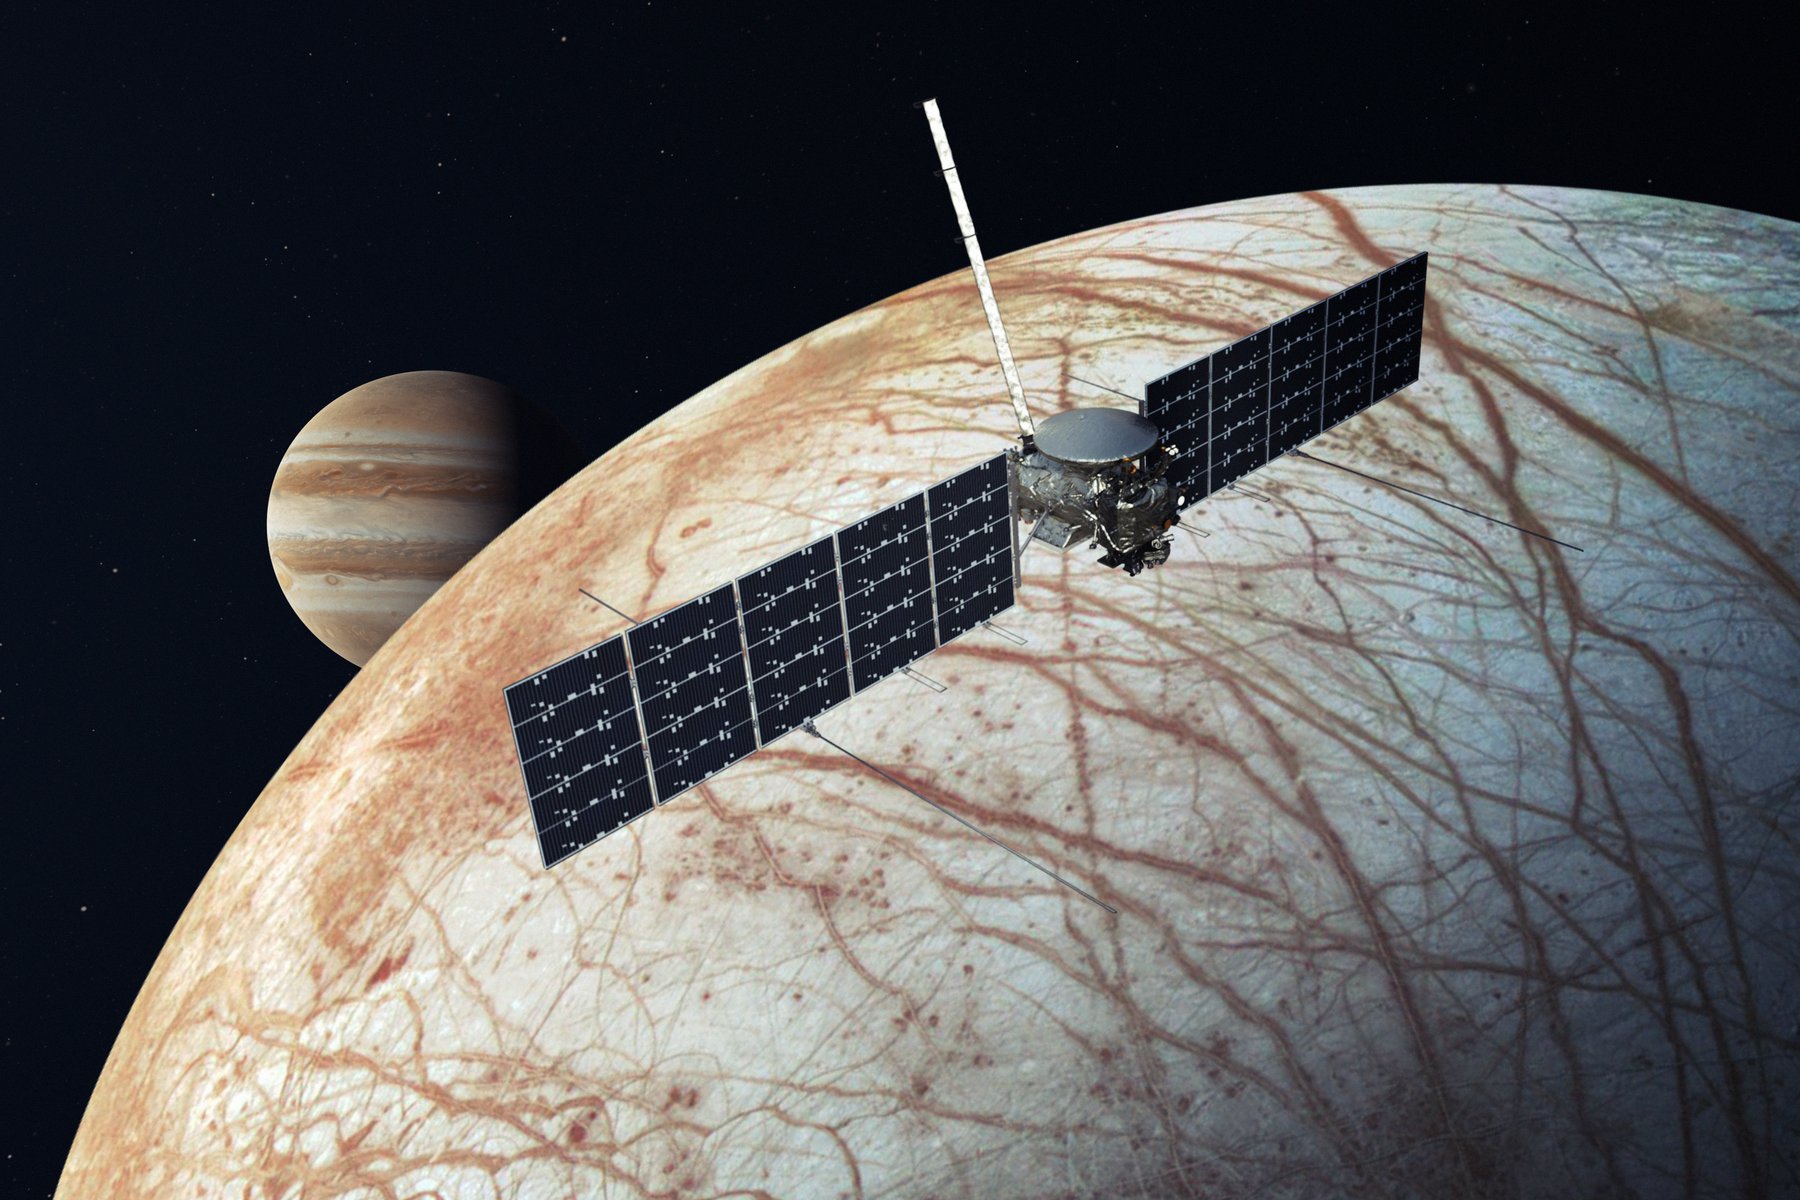 The Europa Clipper spacecraft has a box-like center with rectangular solar panels extending from either side like wings. It's shown flying above Europa with Jupiter visible in the distance.